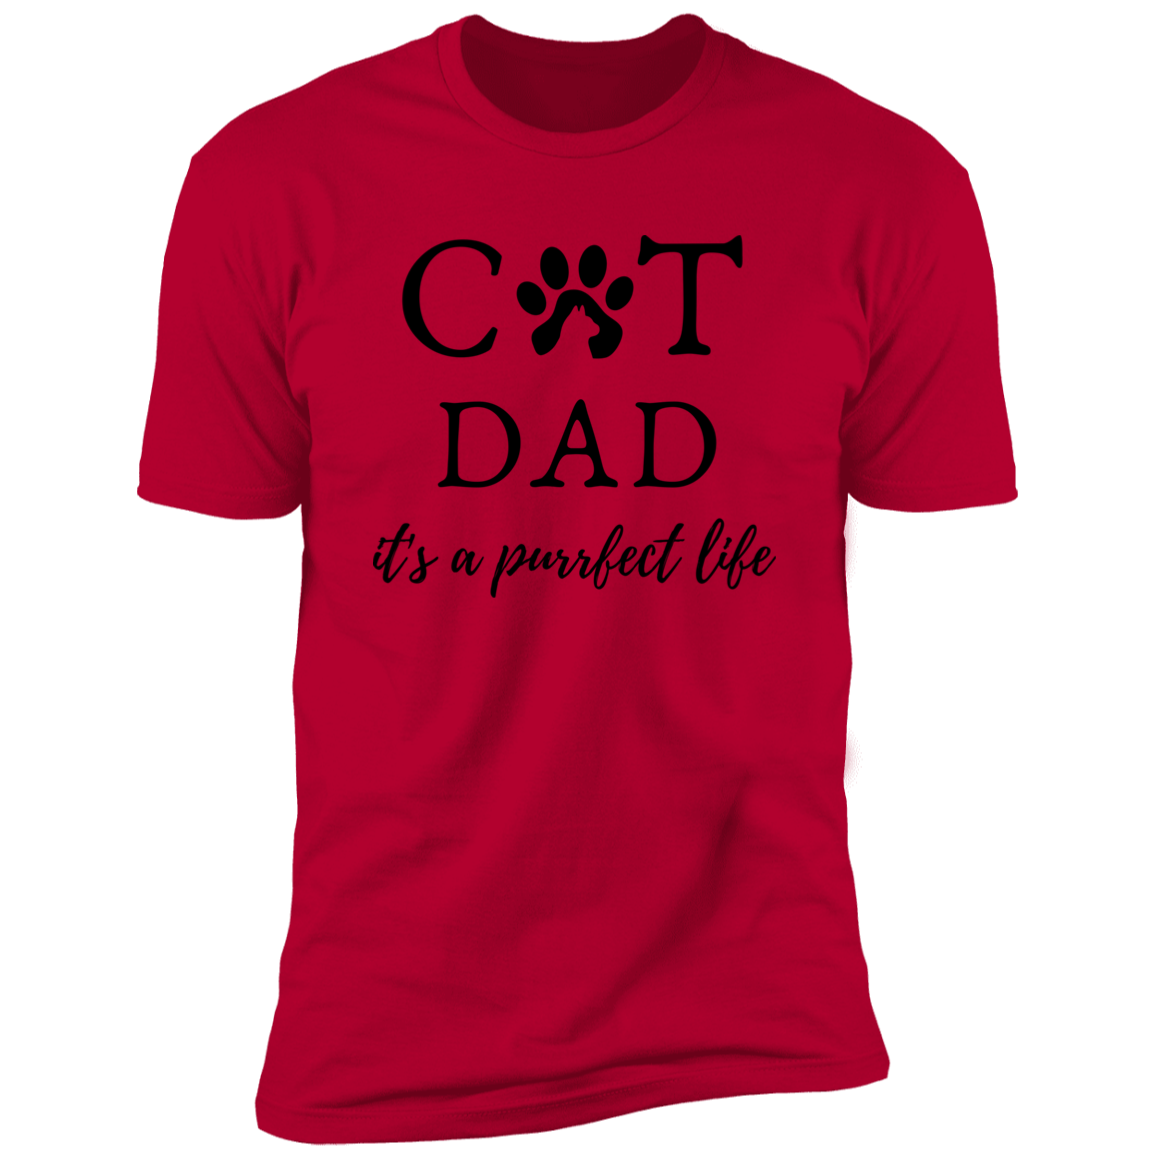 Cat Dad It's a Purrfect Life T-shirt, Cat Dad Shirt for humans, in red